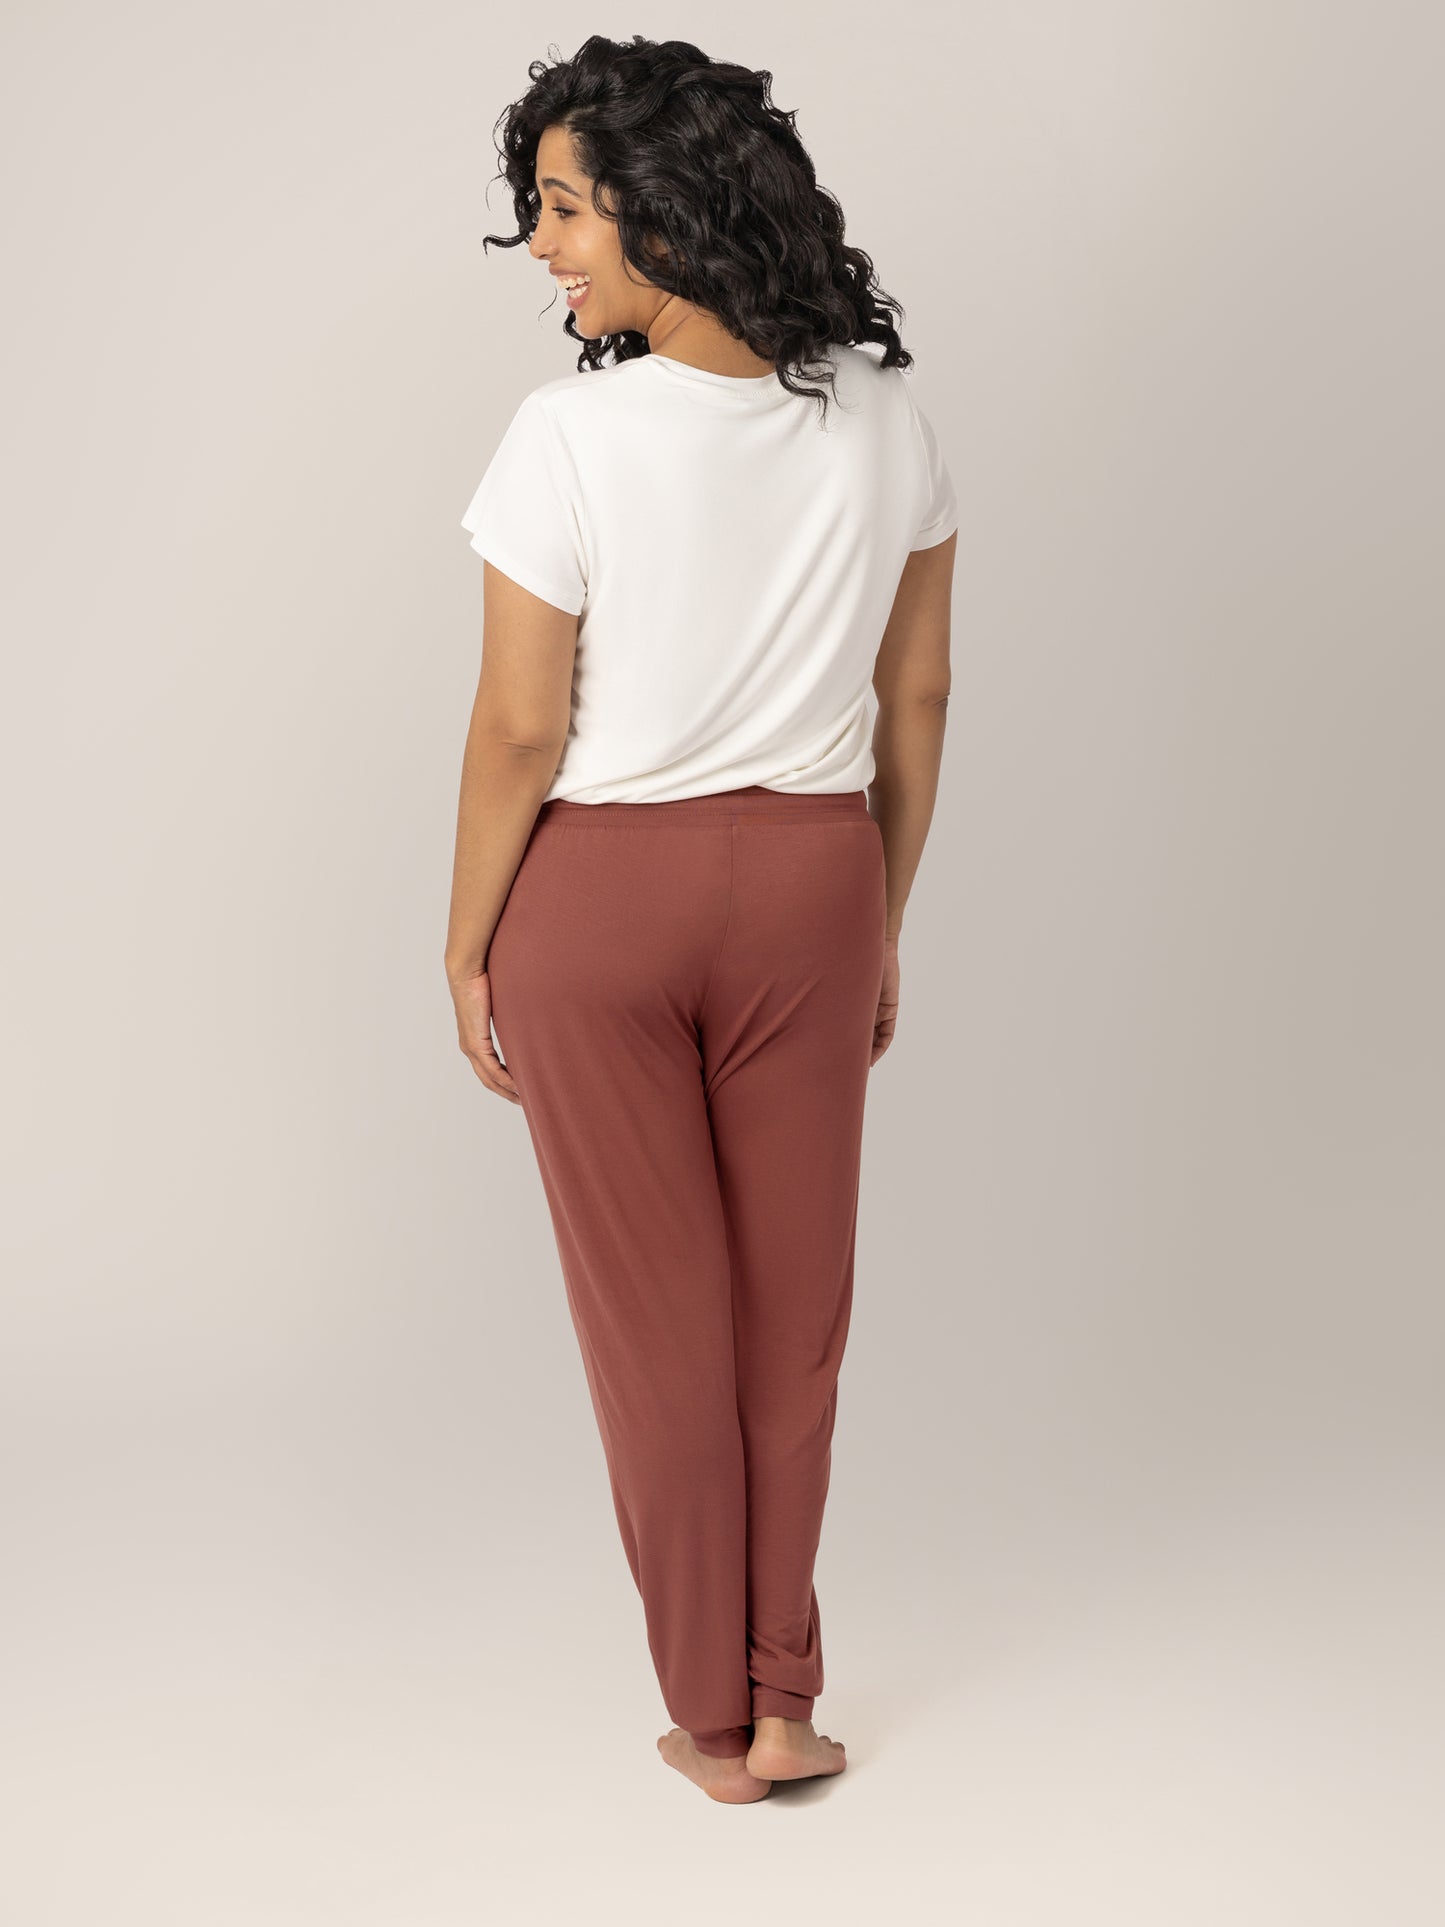 Back view of model wearing the Everyday Lounger Jogger in Redwood.